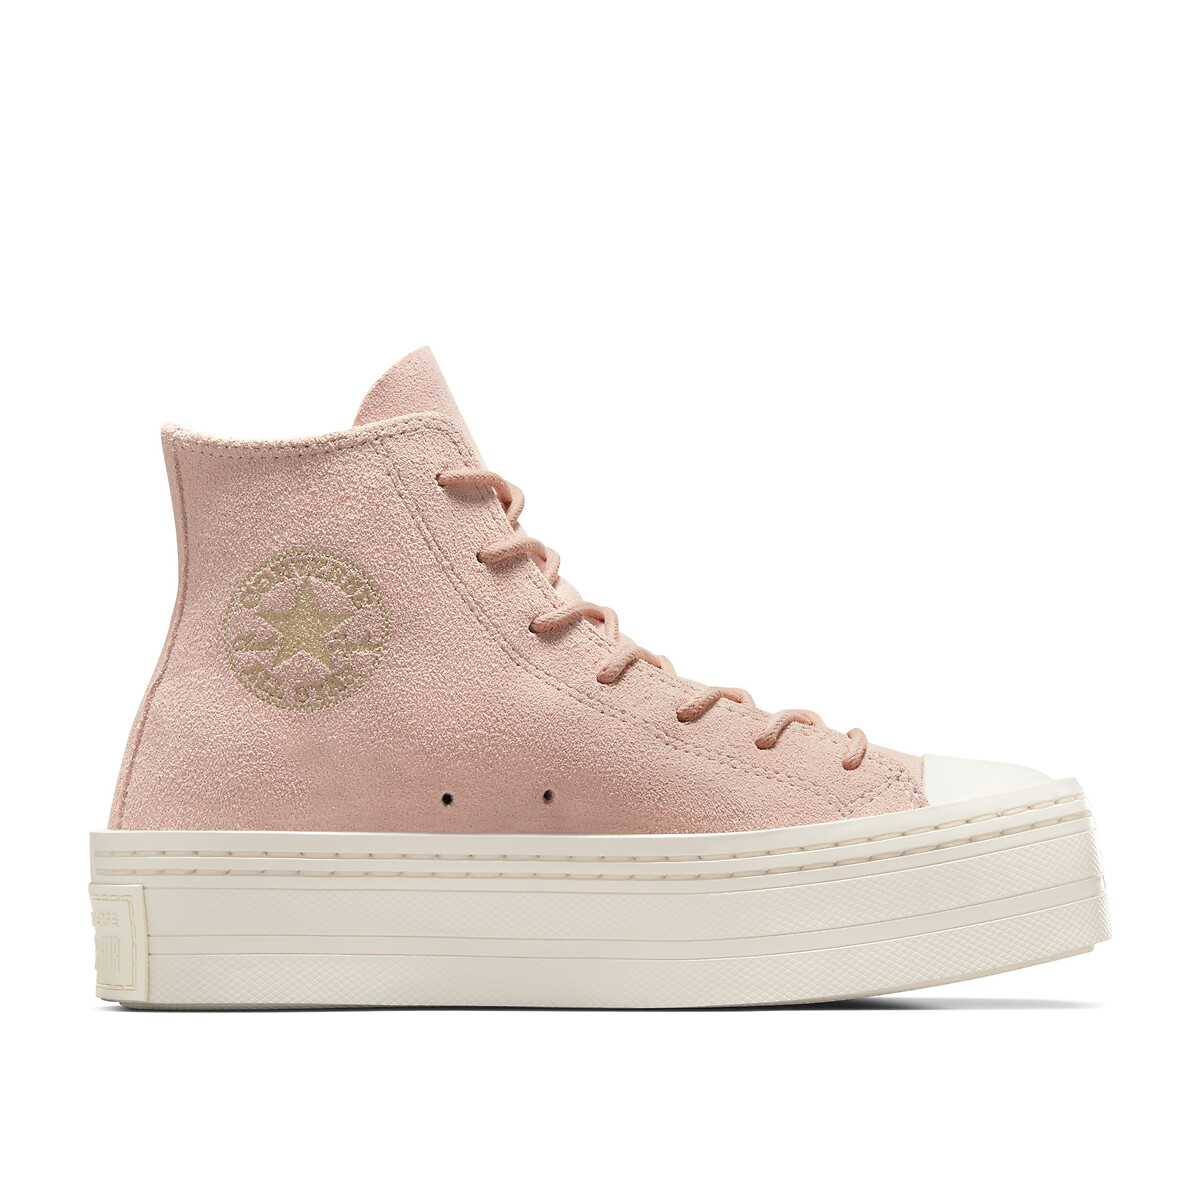 Image of Modern Lift Hi Fashion Suede & Leather High Top Trainers